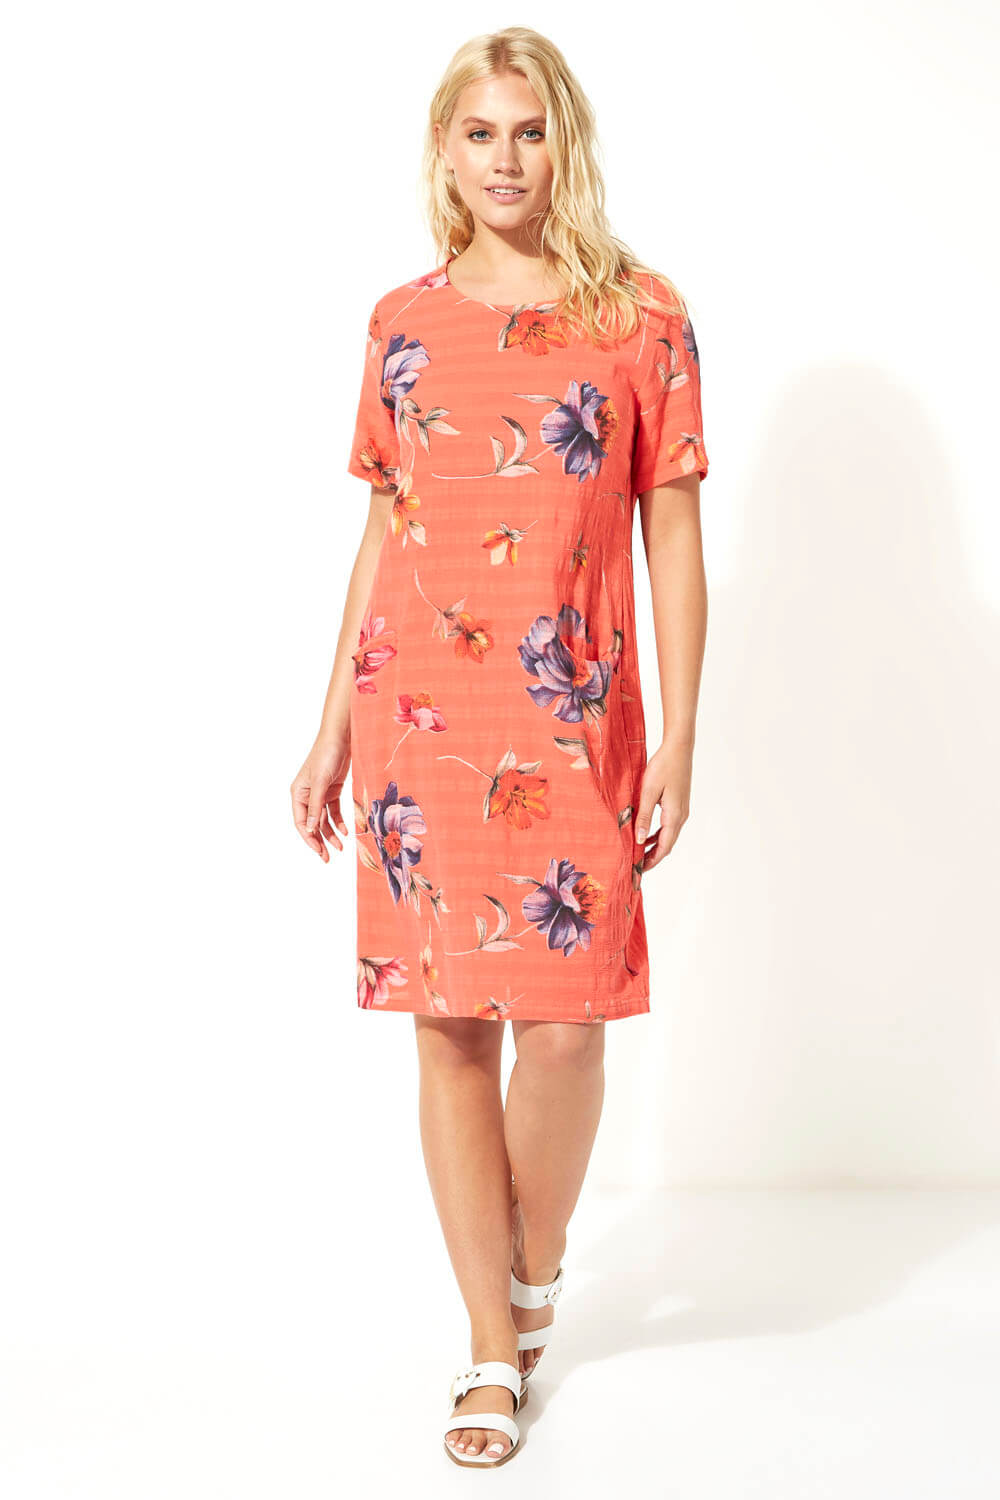 CORAL Floral Textured Cotton Cocoon Dress, Image 2 of 5